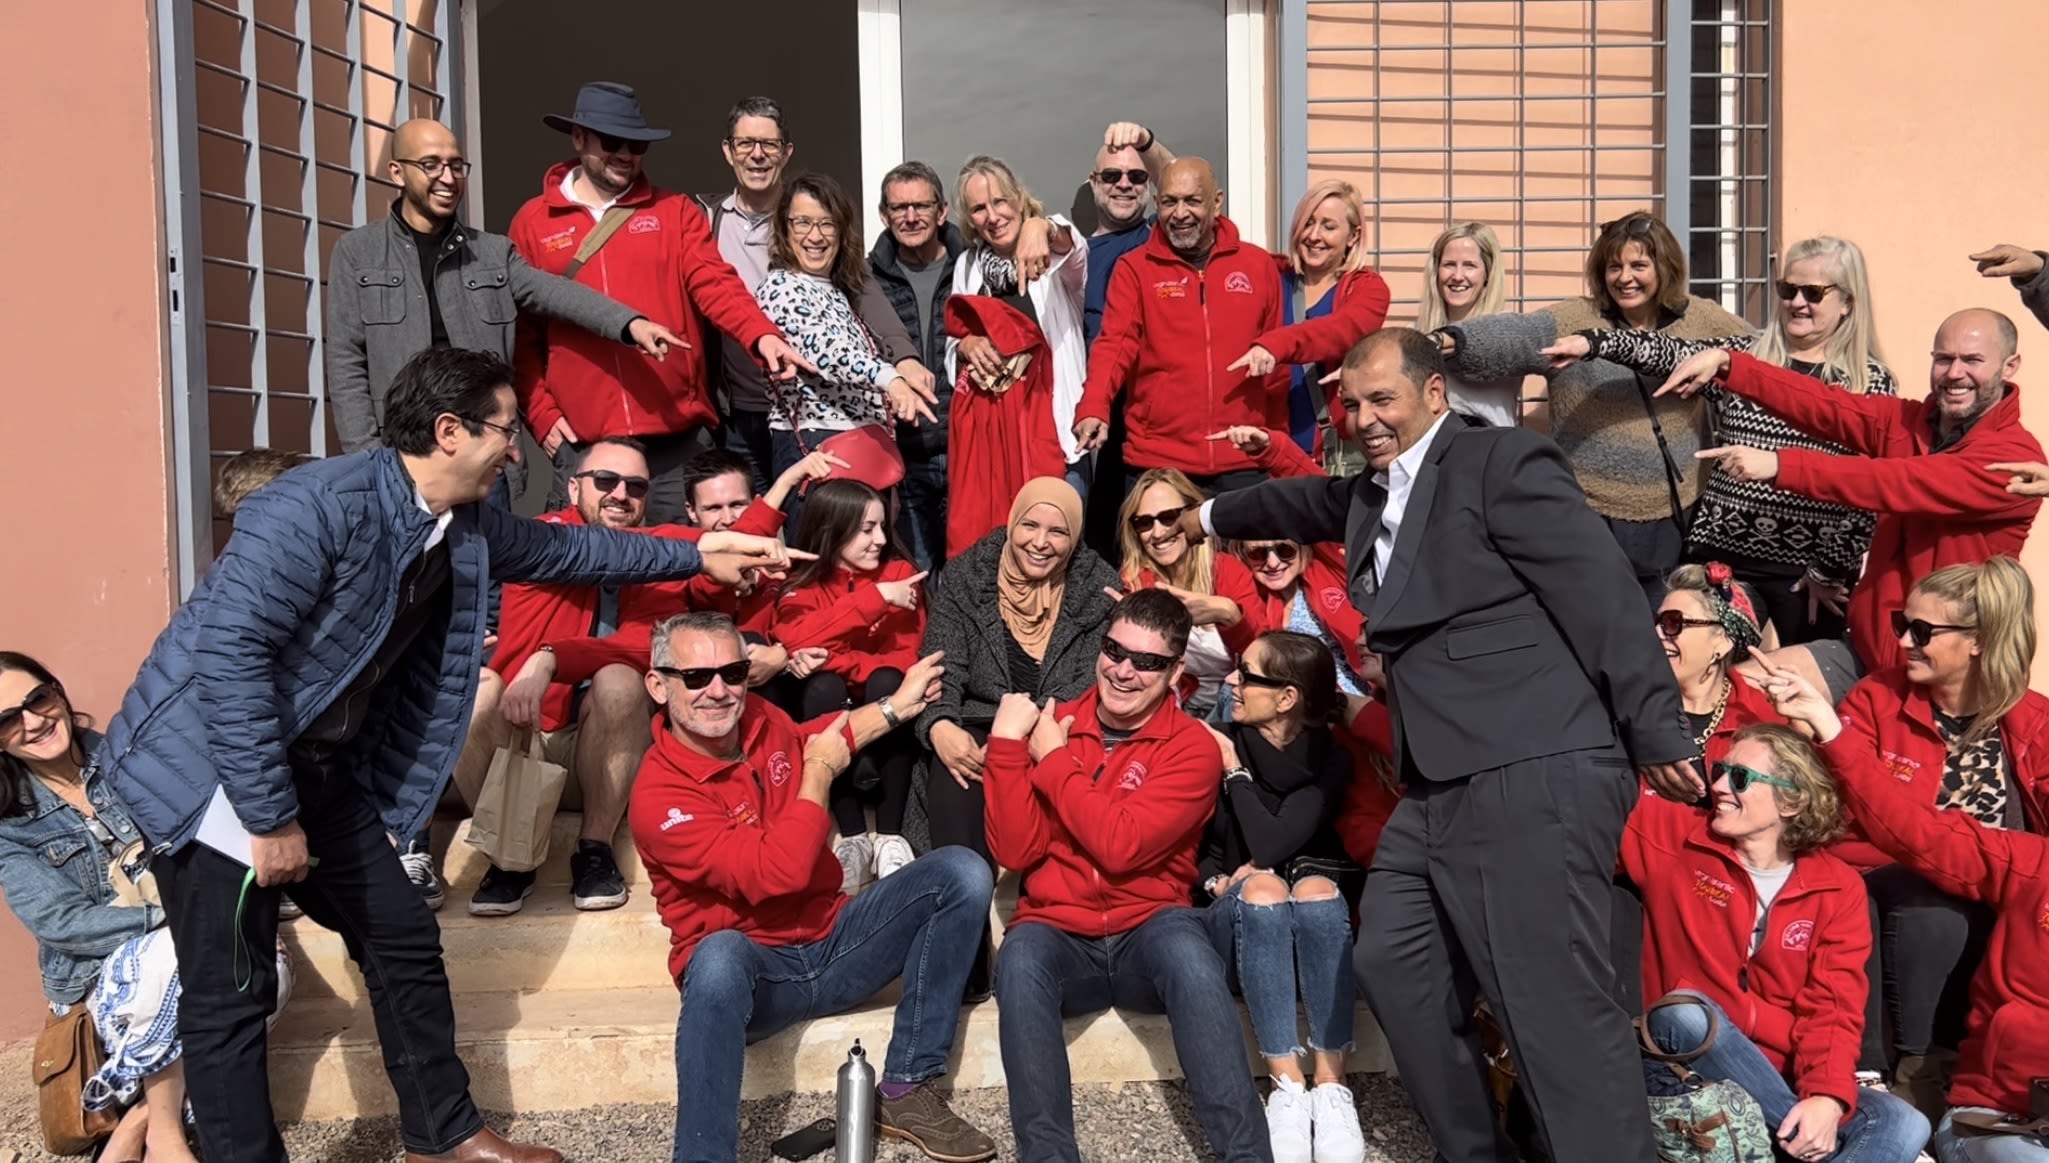 Fatima Gouansa, EBF Operations Manager, on the steps of the study centre with Virgin Atlantic's Climb Morocco 2022 group